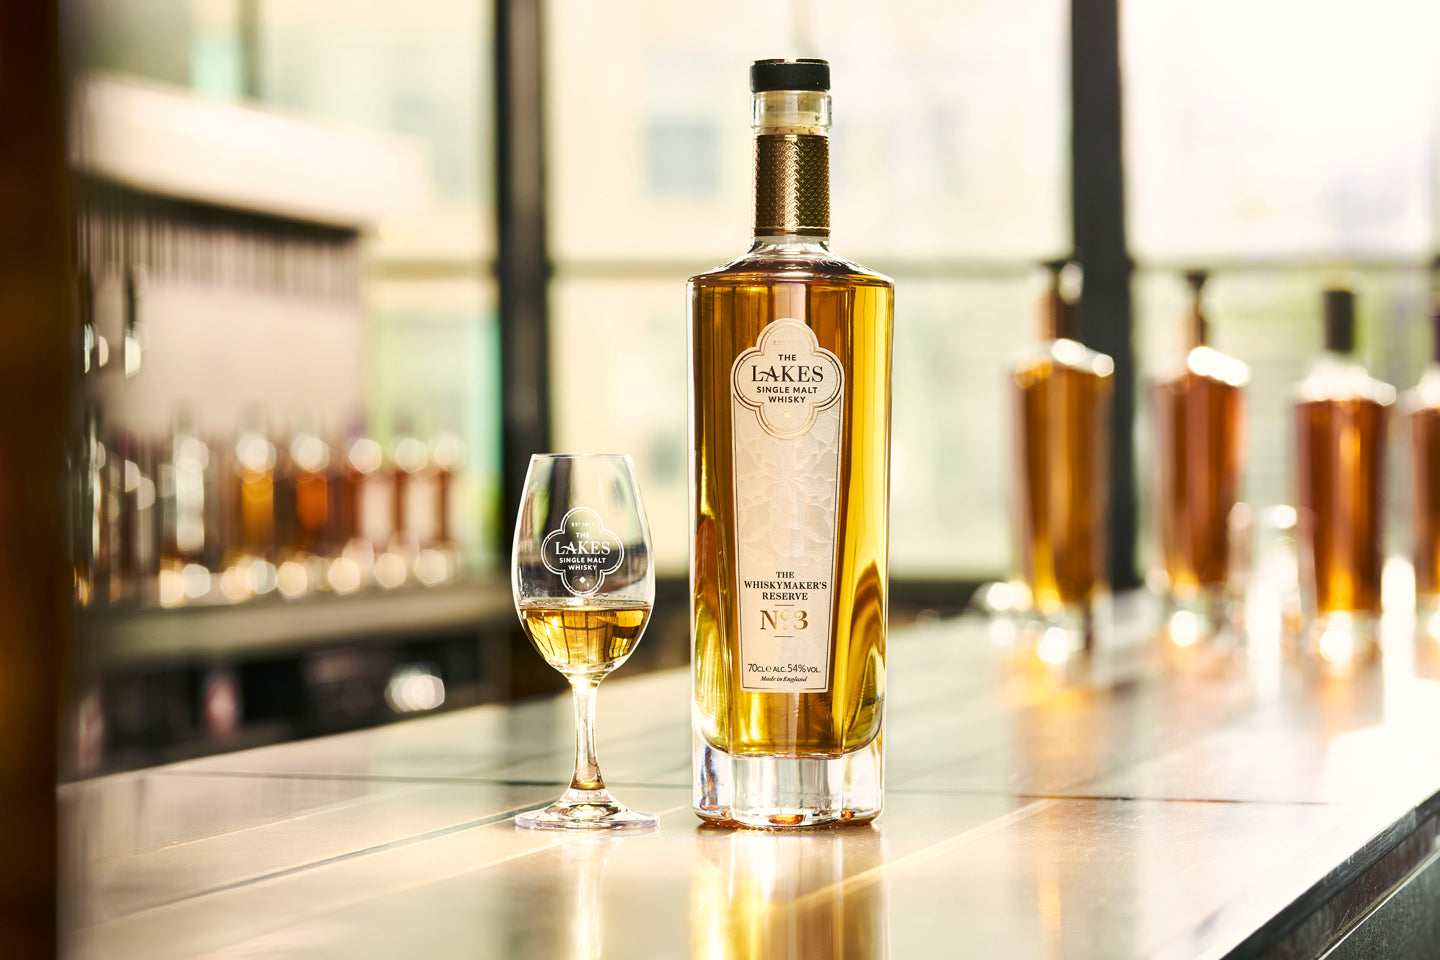 The Lakes Whiskymaker Reserve No.3 whisky